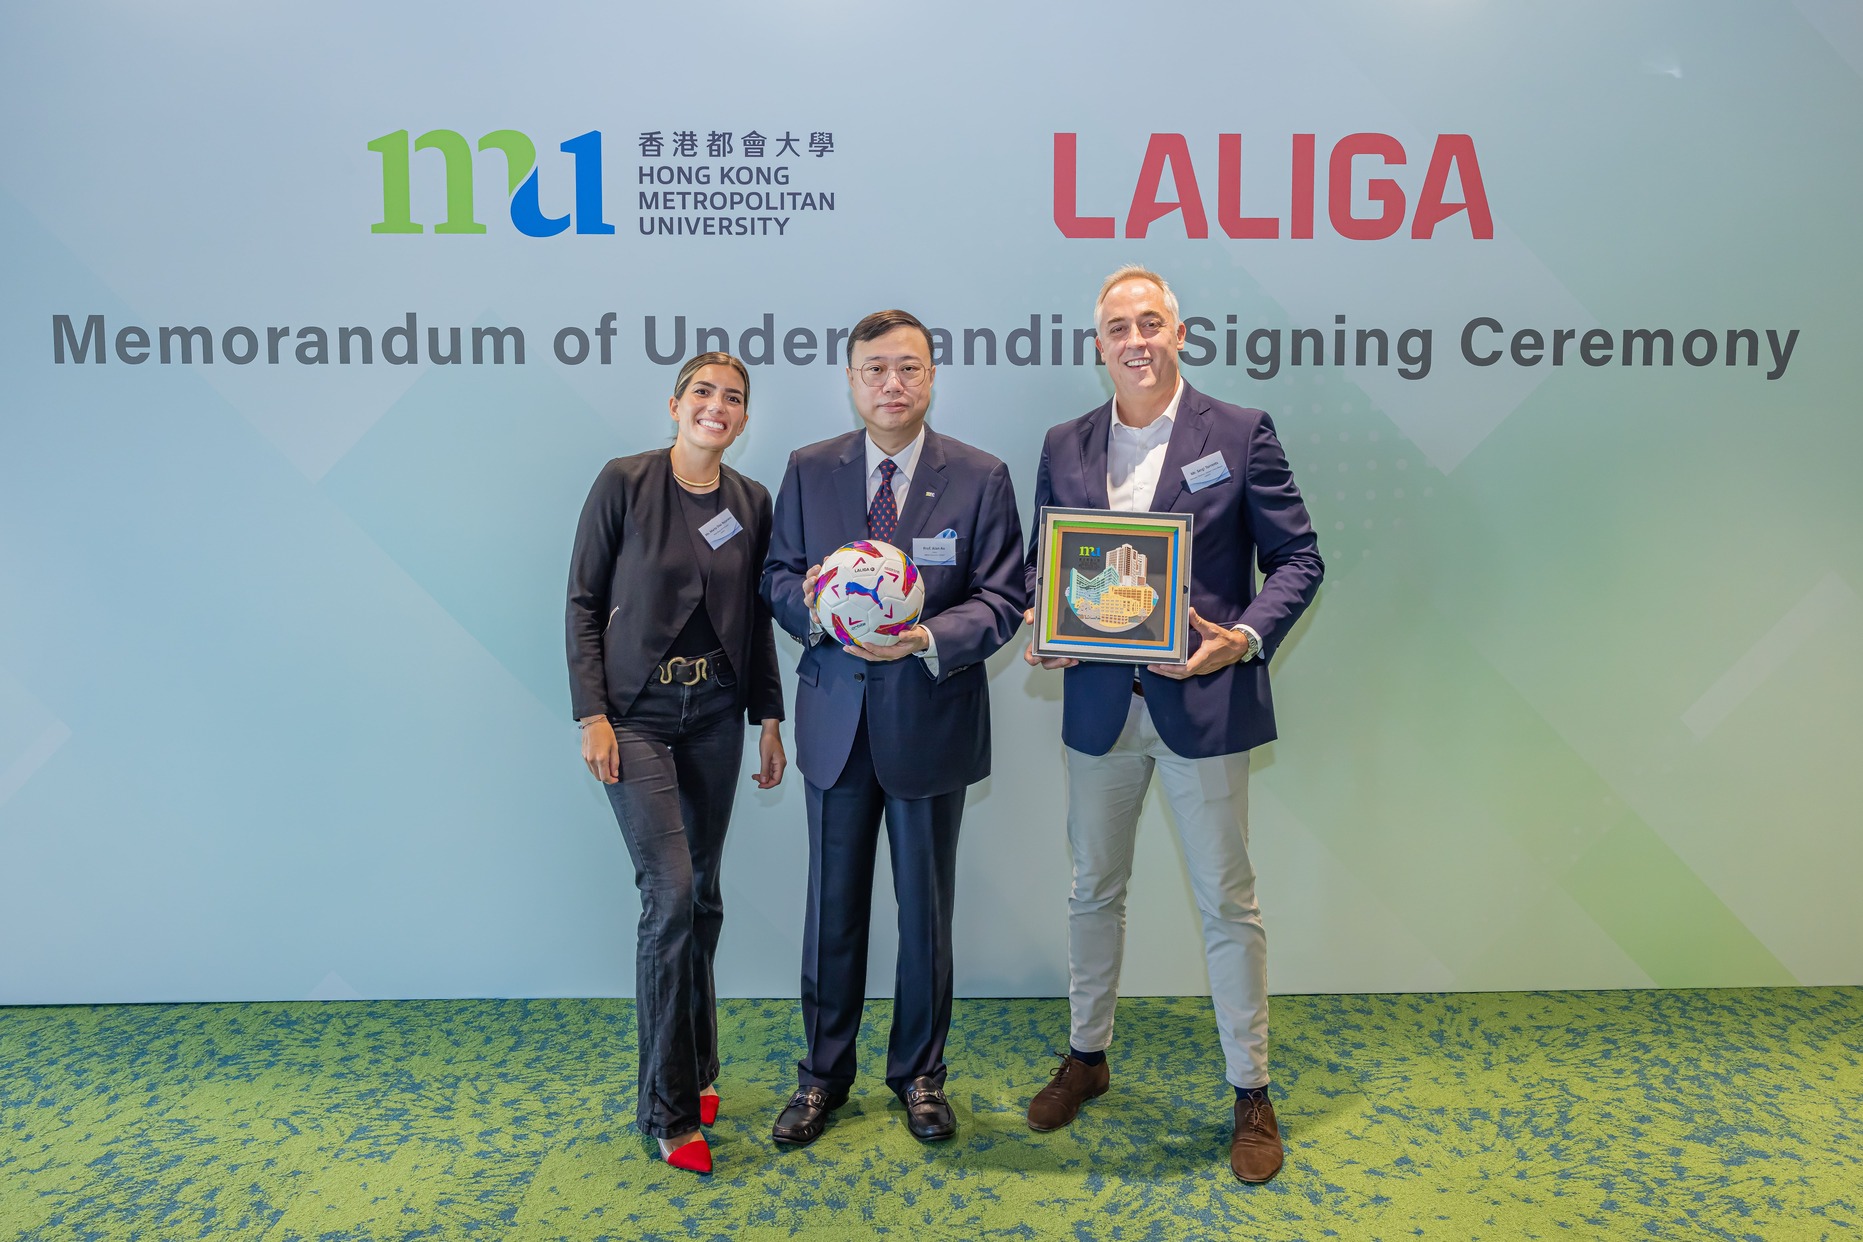 Dean of HKMU Business School Prof. Alan Au (centre) exchanges souvenirs with Managing Director of LALIGA in China Mr Sergi Torrents (right) and LALIGA Hong Kong SAR Delegate Ms Marta Diaz Bejarano (left).